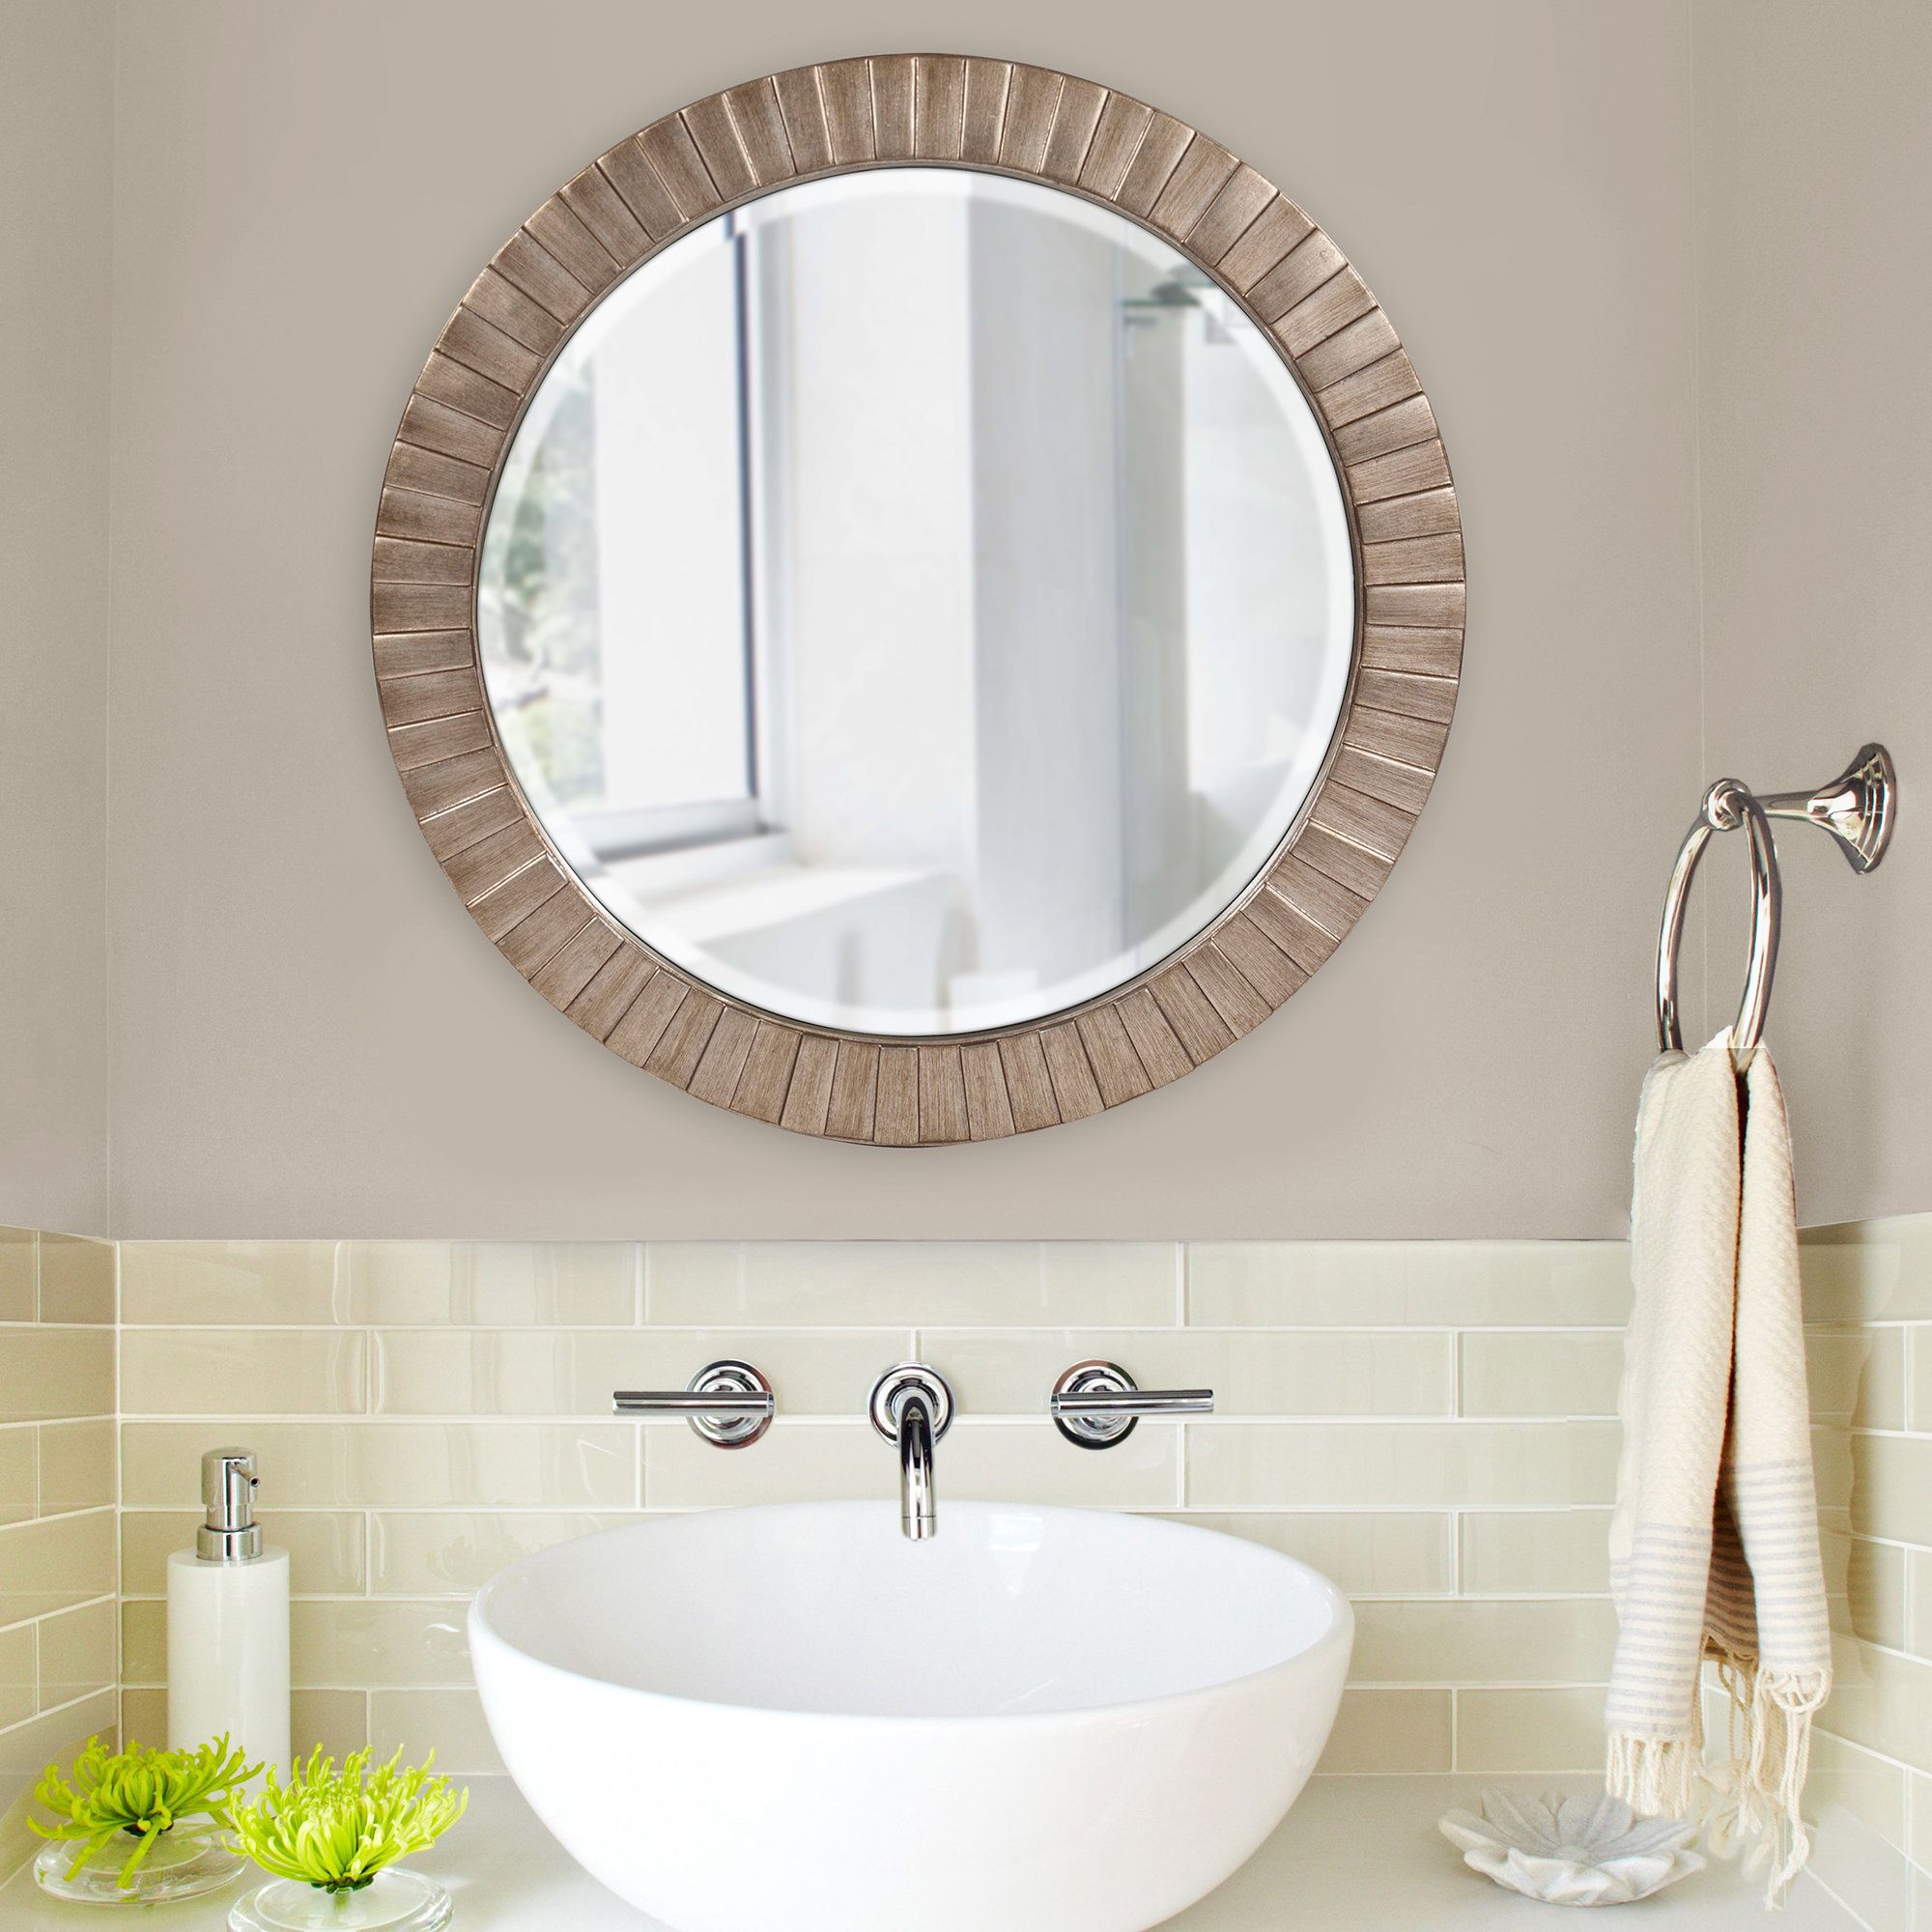 Labarge Accent Mirror & Reviews | Joss & Main Within Mcnary Accent Mirrors (View 6 of 20)